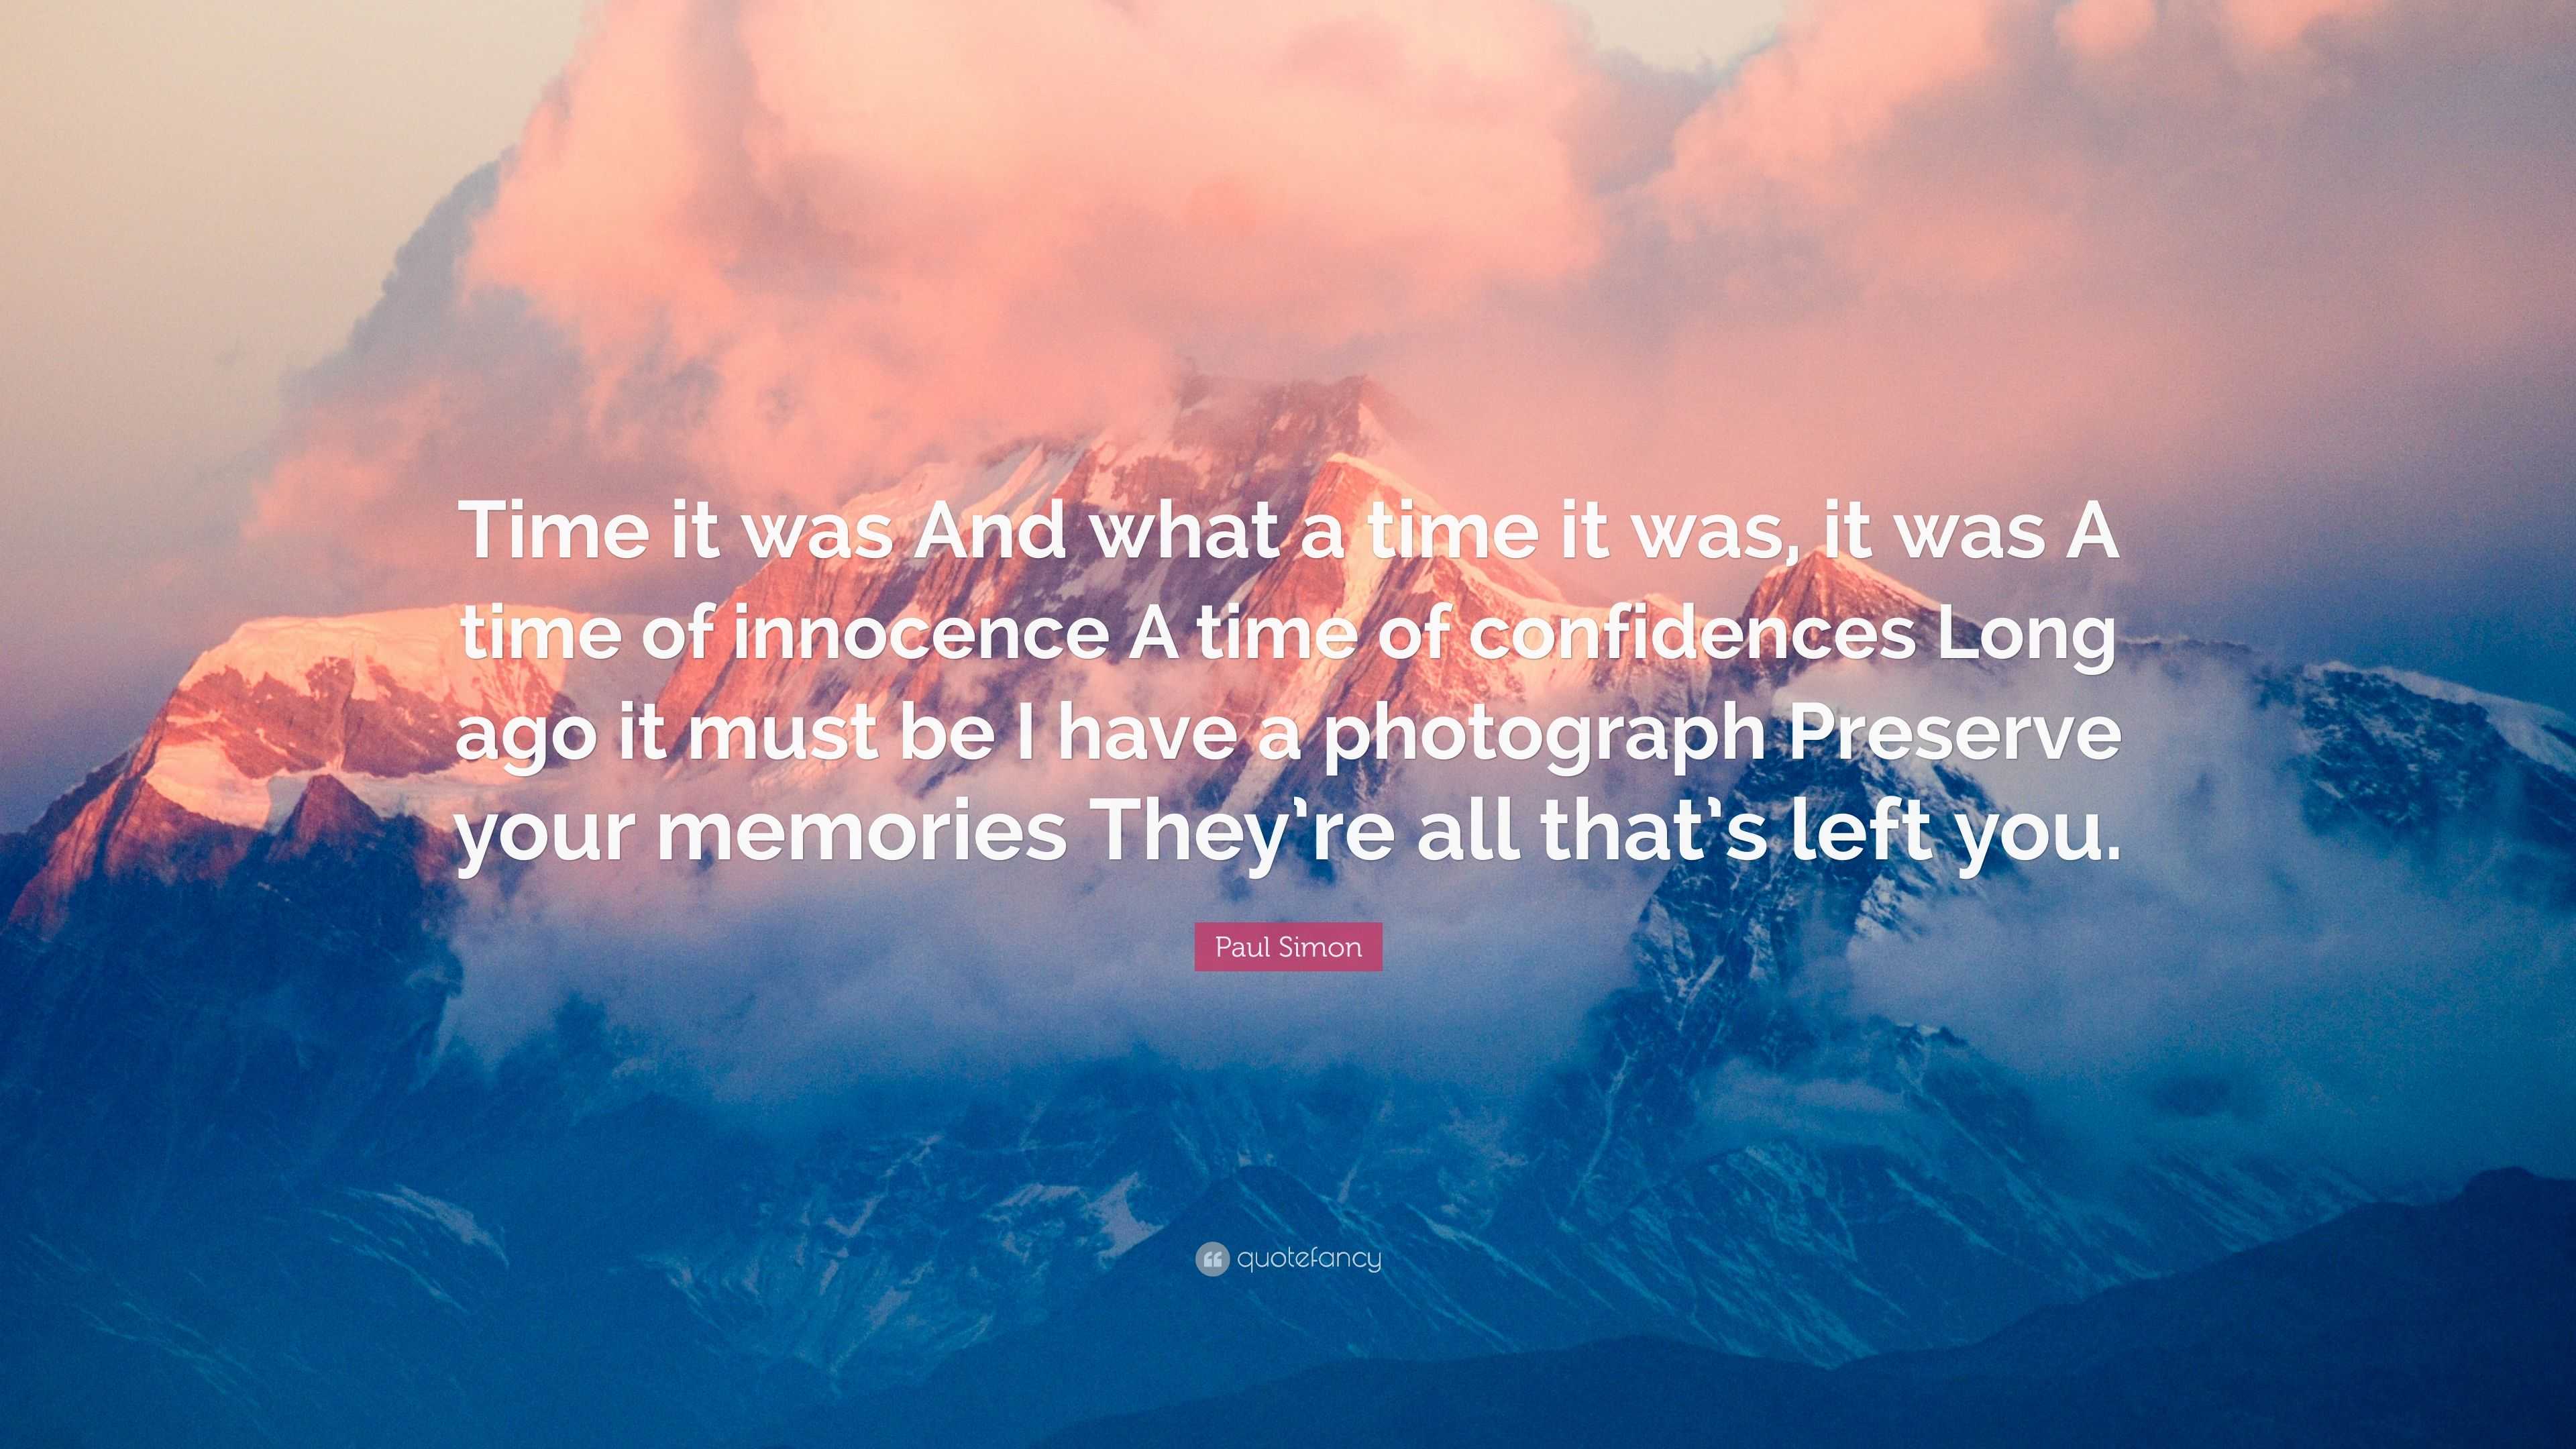 Paul Simon Quote: “Time it was And what a time it was, it was A time of ...